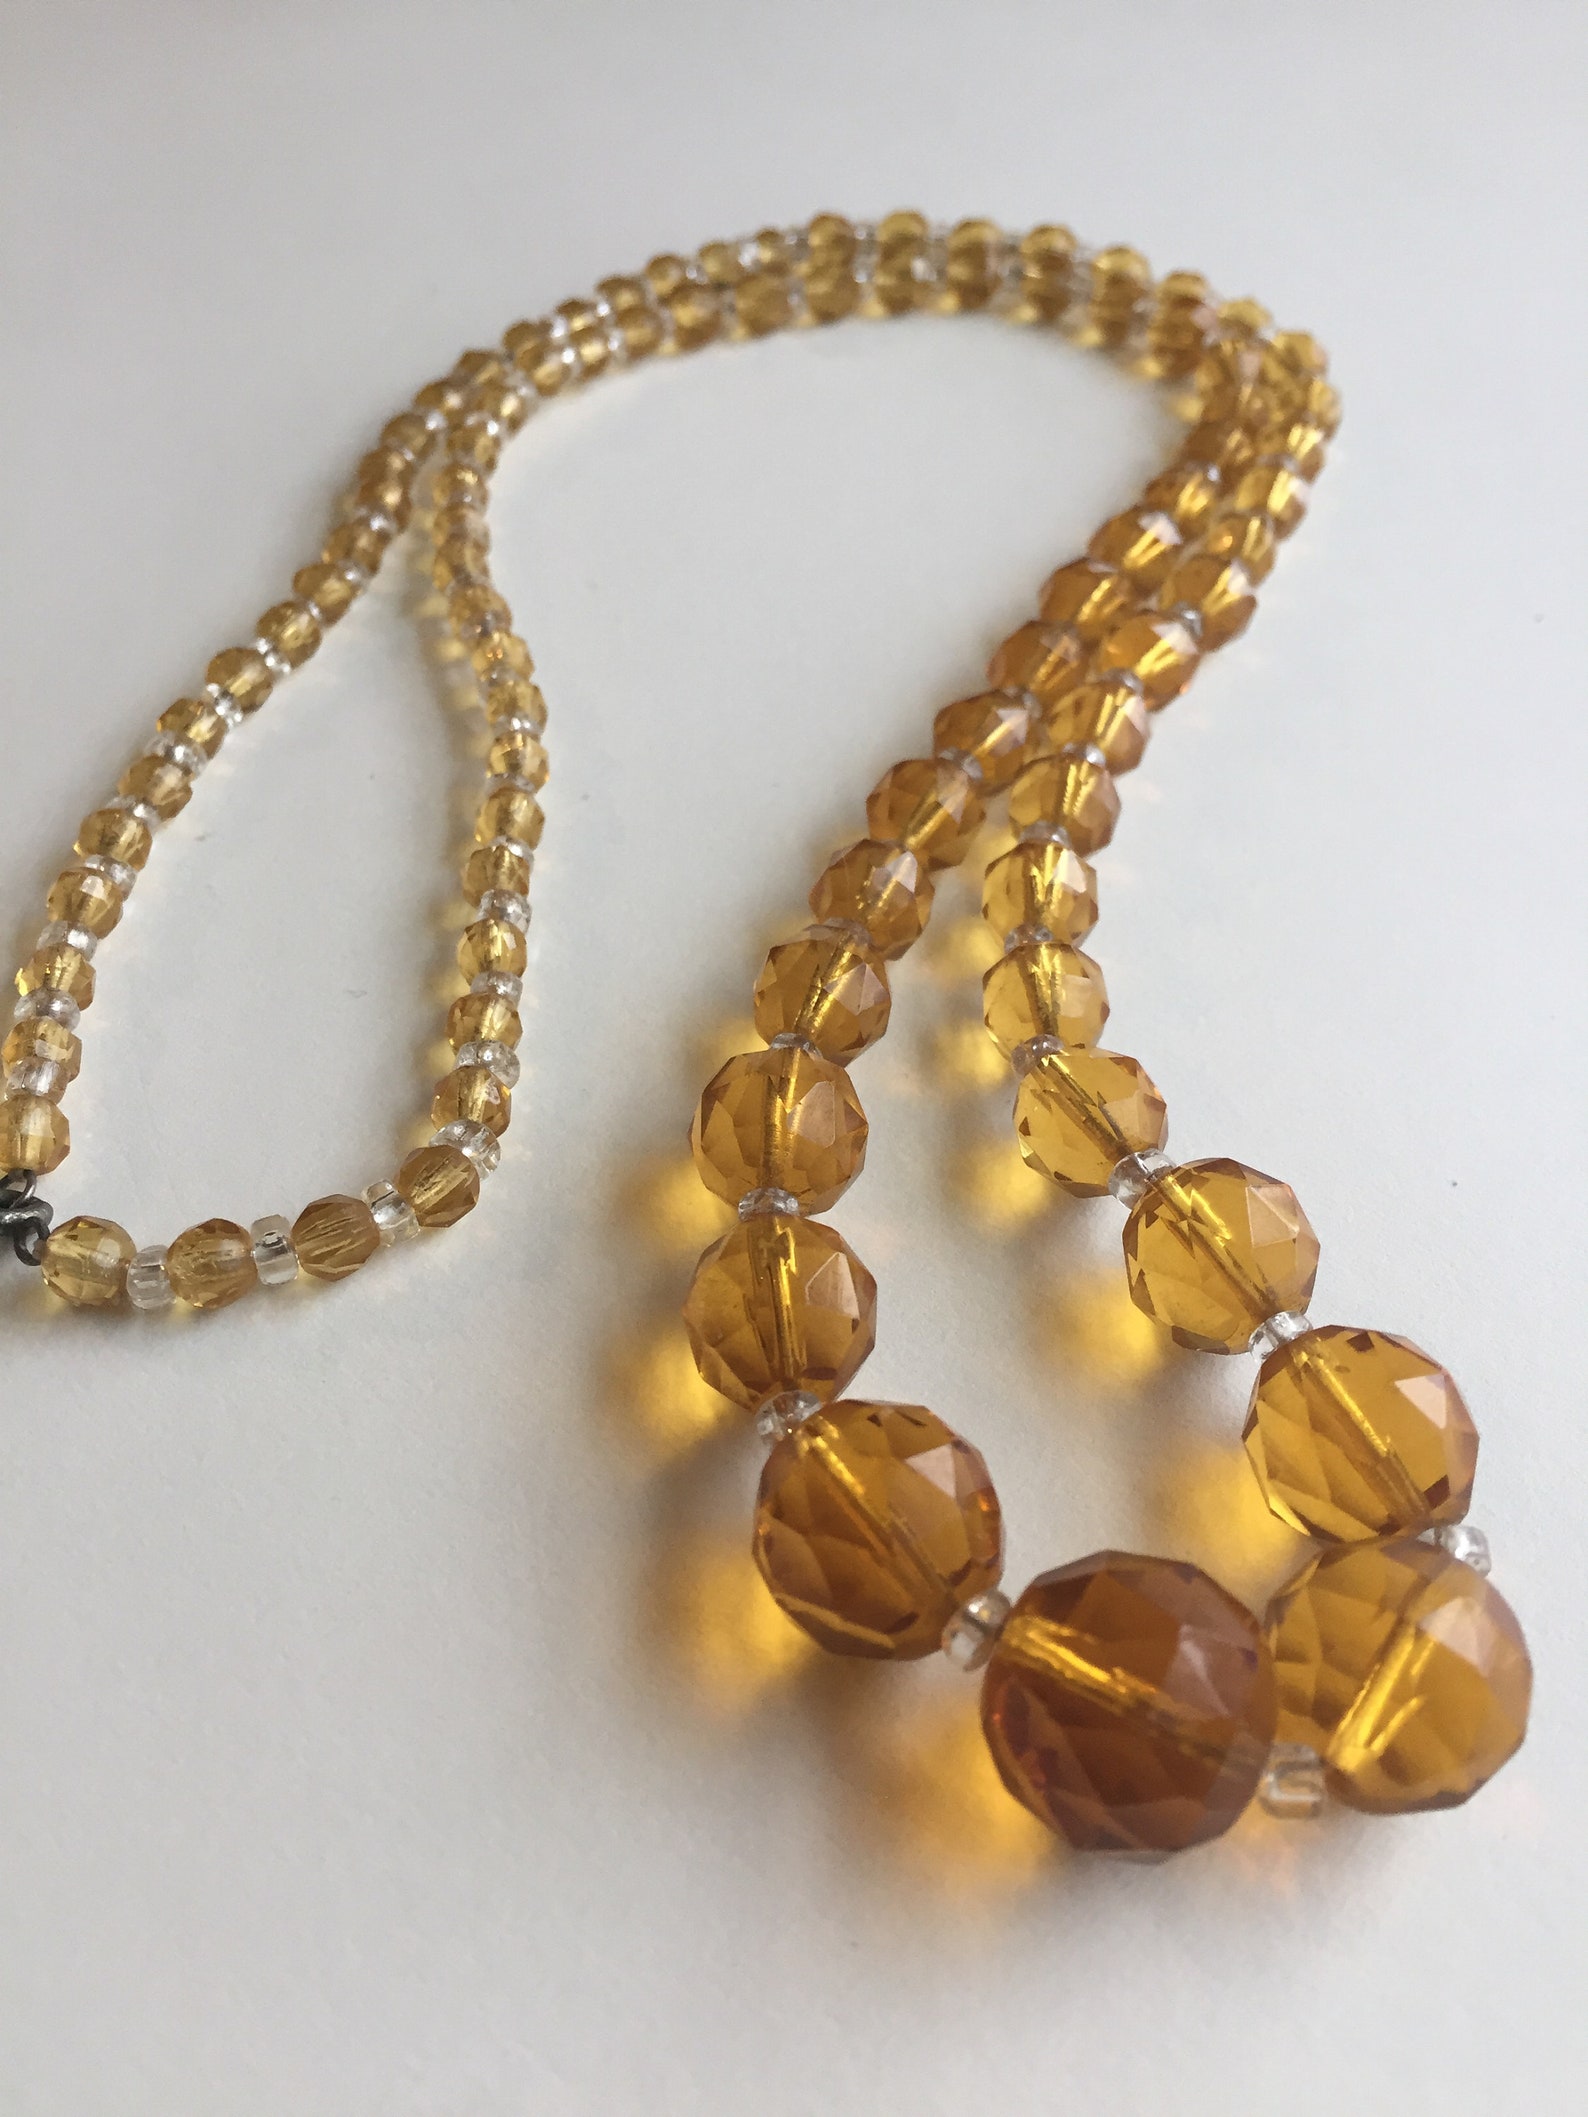 Amber Colored Glass Beads - Etsy